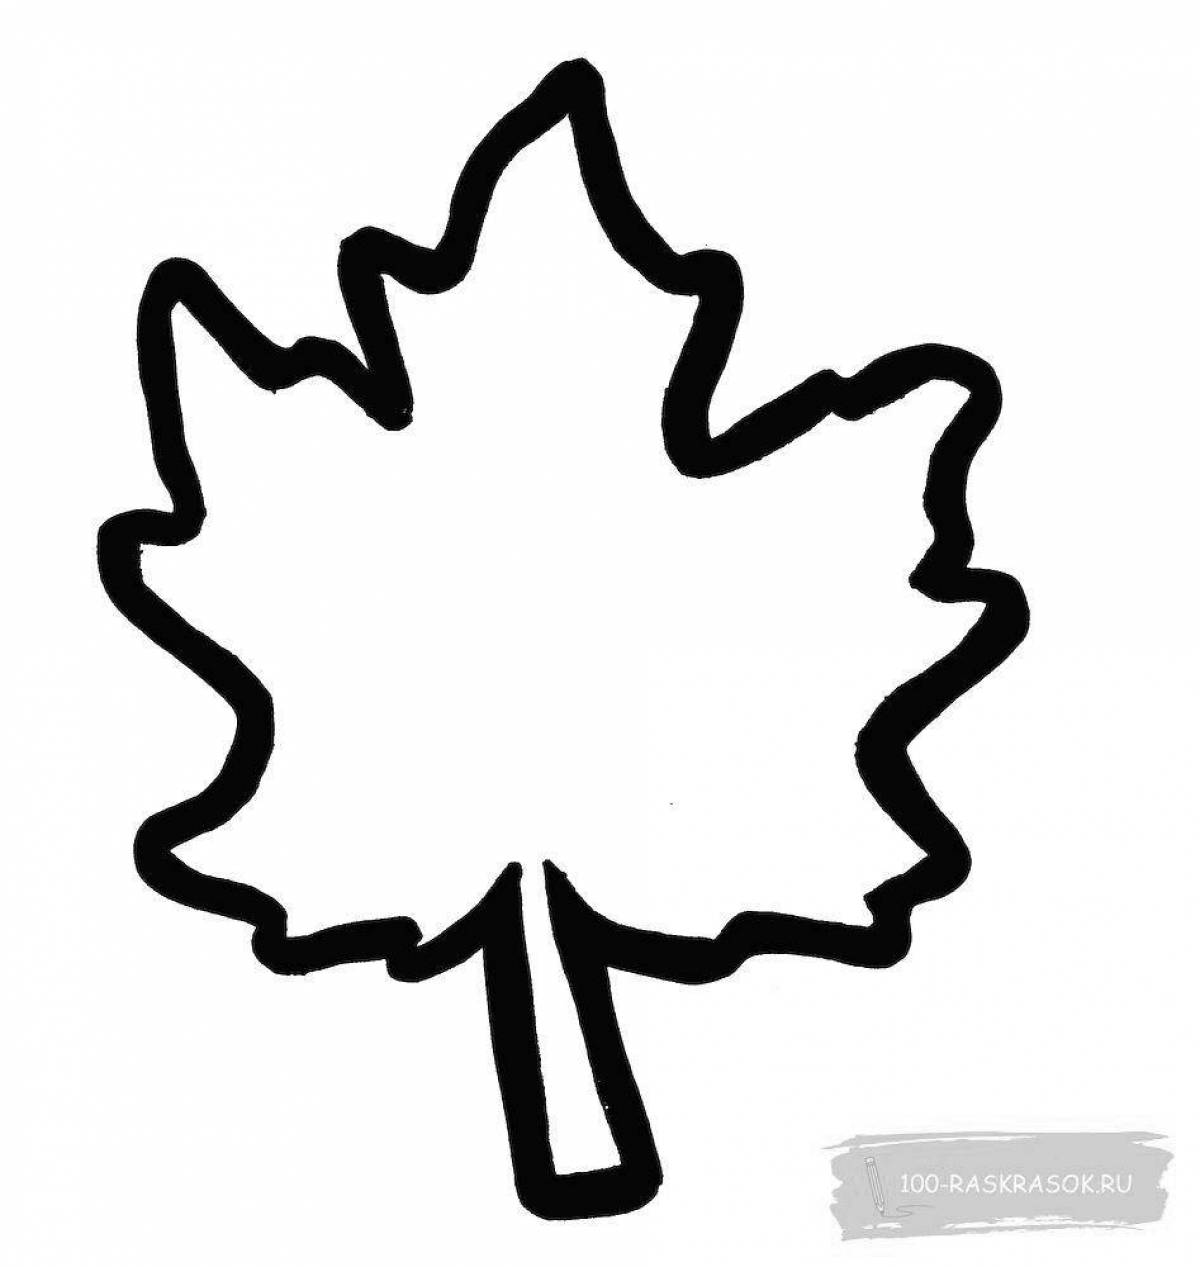 Wonderful maple leaf coloring book for kids